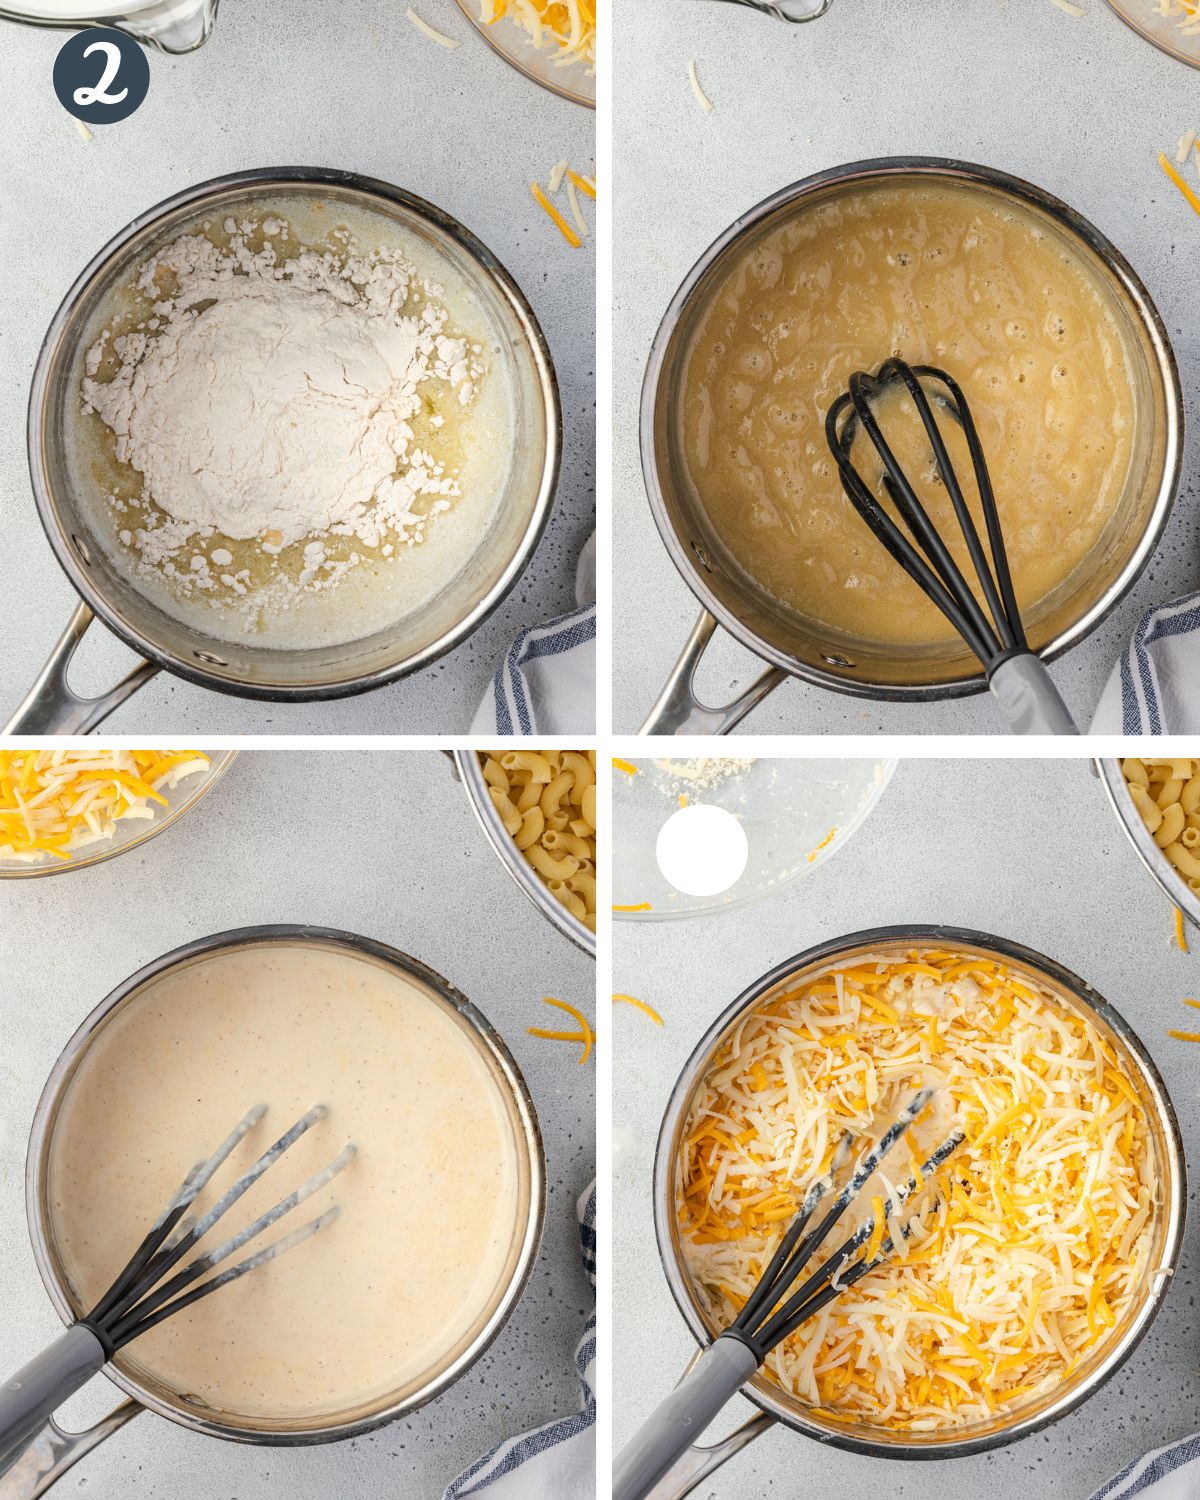 4 steps to making the cheese sauce.